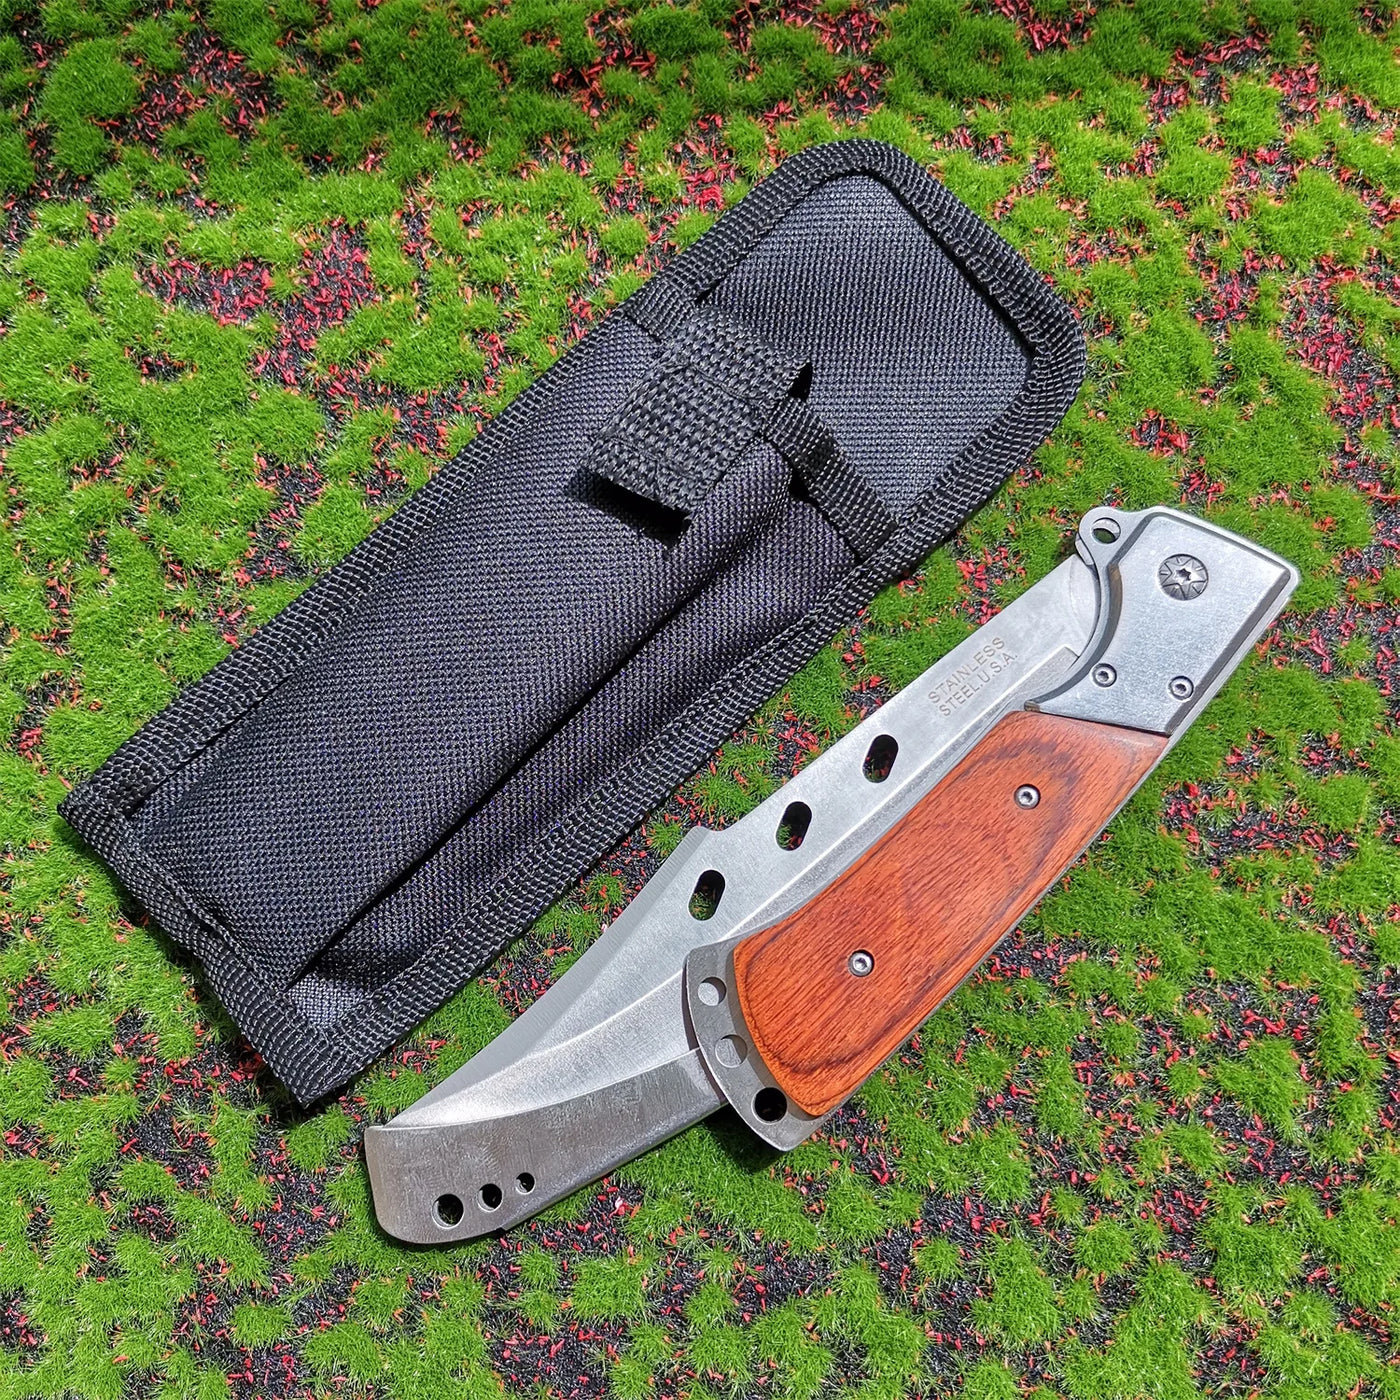 Dovetail Folding Knife - Stainless Steel Camping Tactical Knife